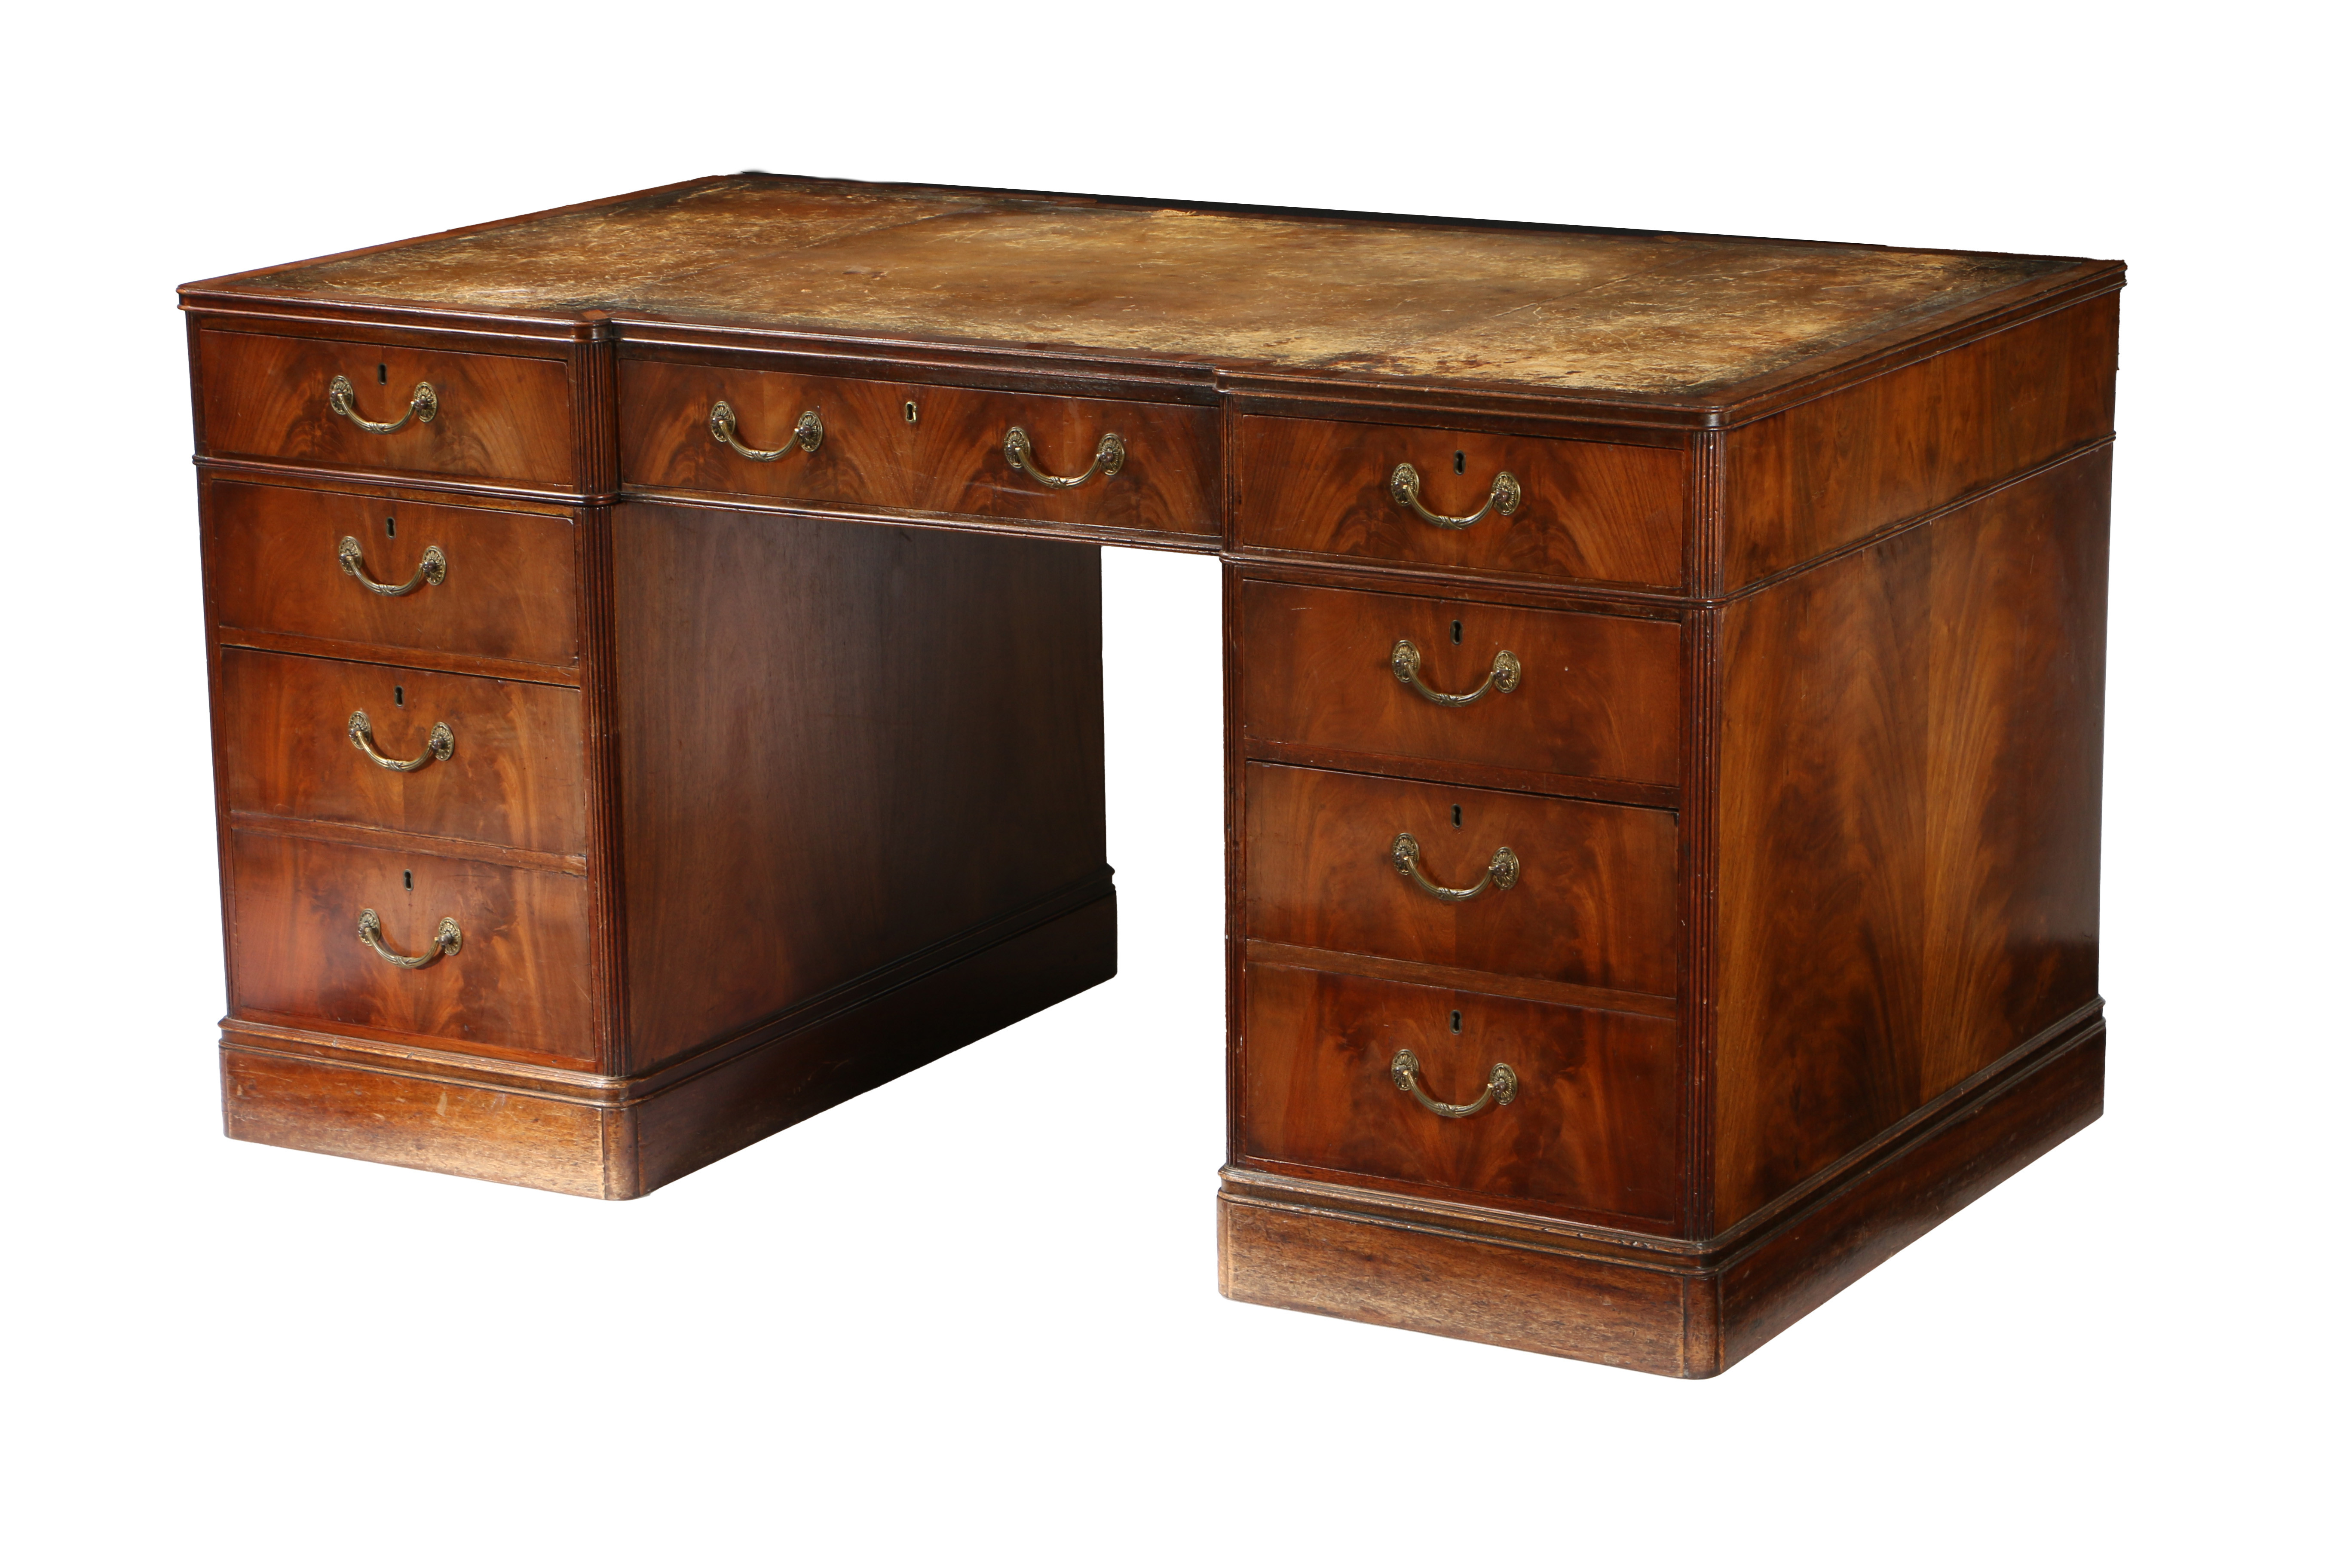 A GEORGE III STYLE MAHOGANY DESK OF BREAKFRONT FORM. - Image 2 of 2